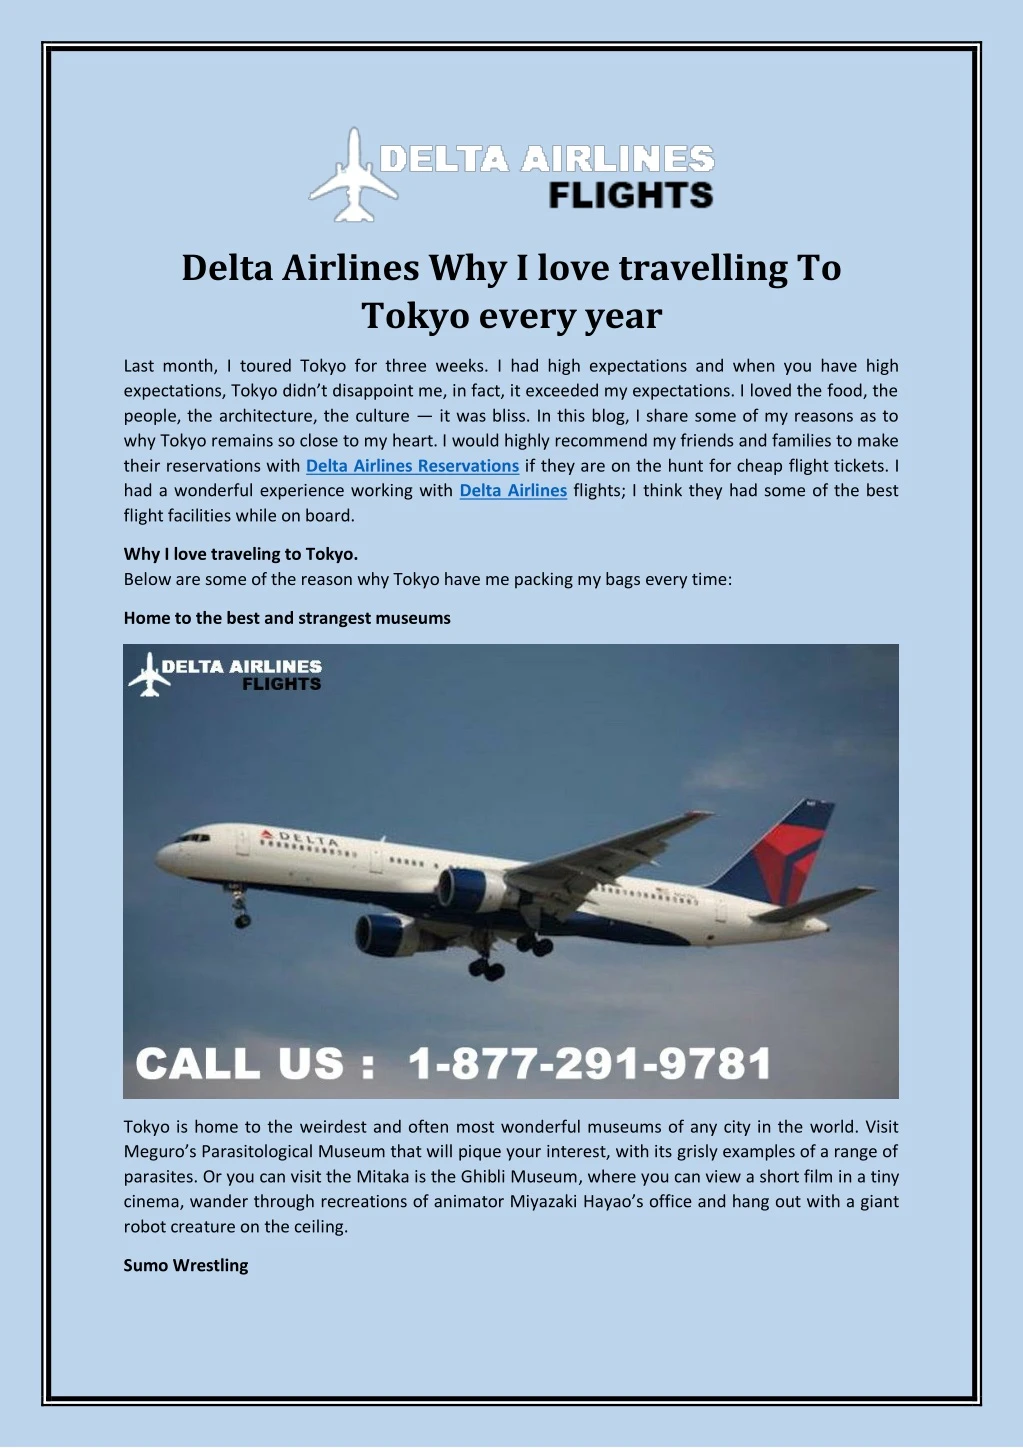 delta airlines why i love travelling to tokyo